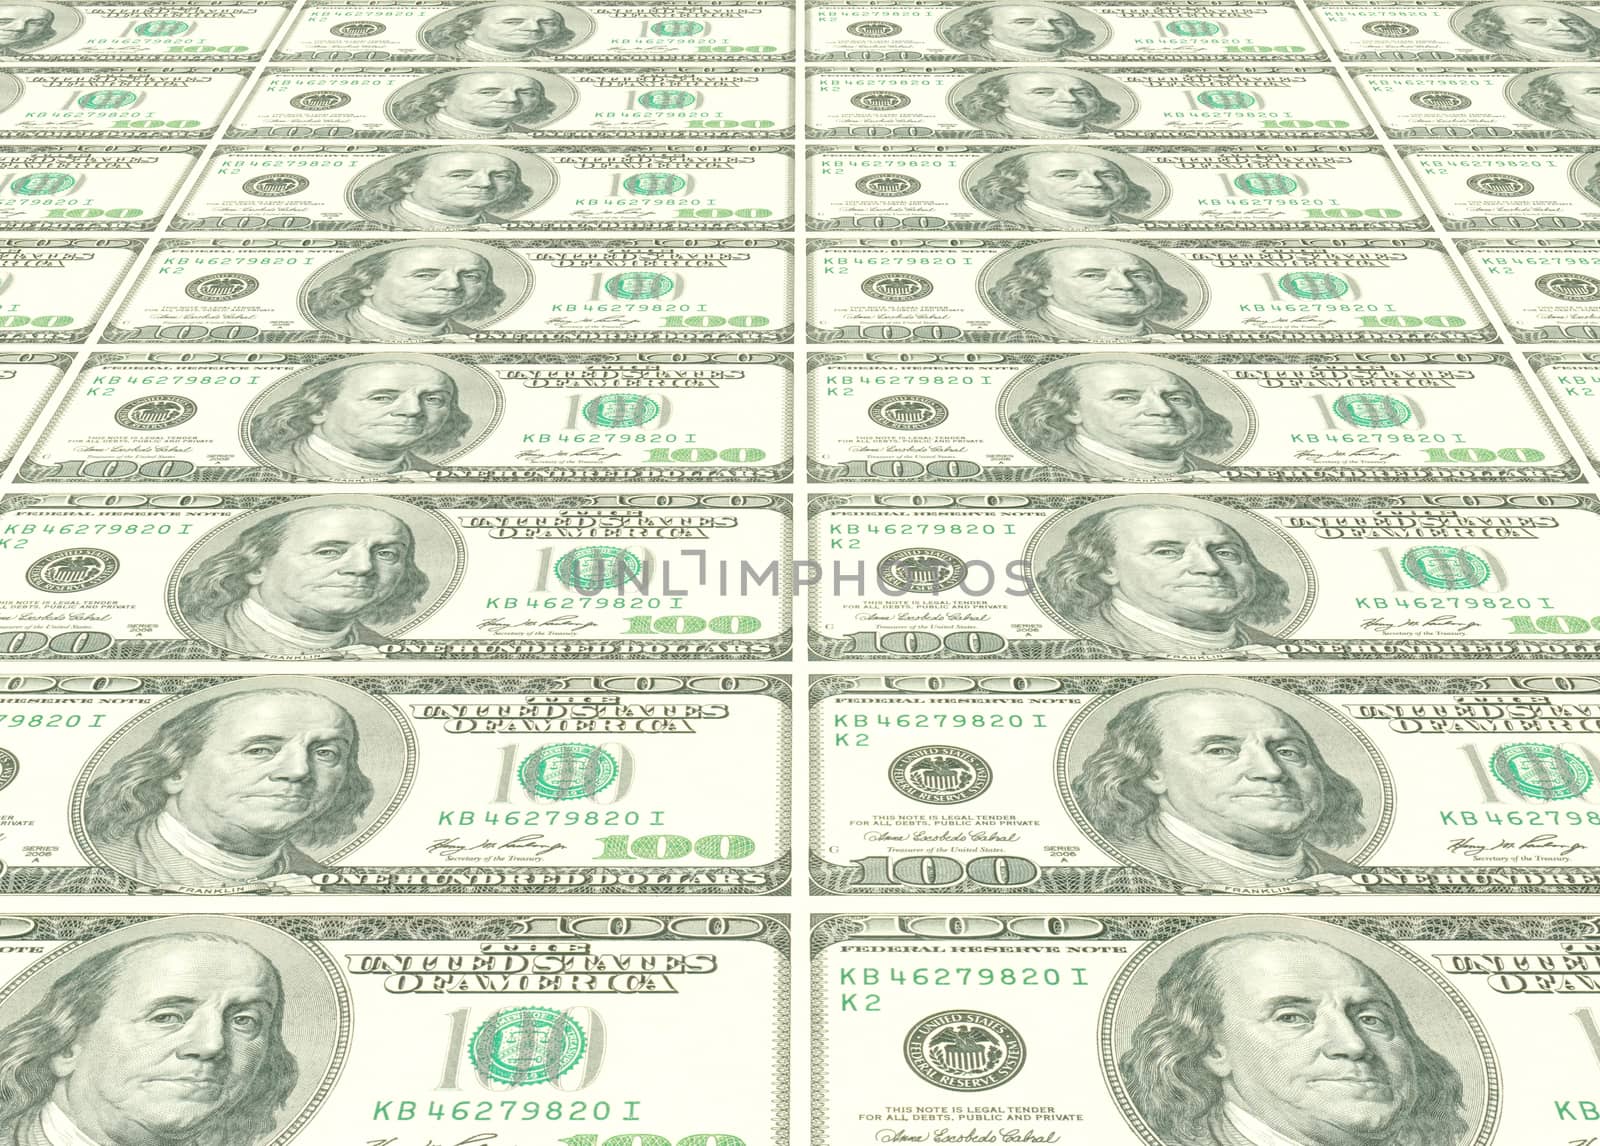 3d generated picture of some hundred dollar bills